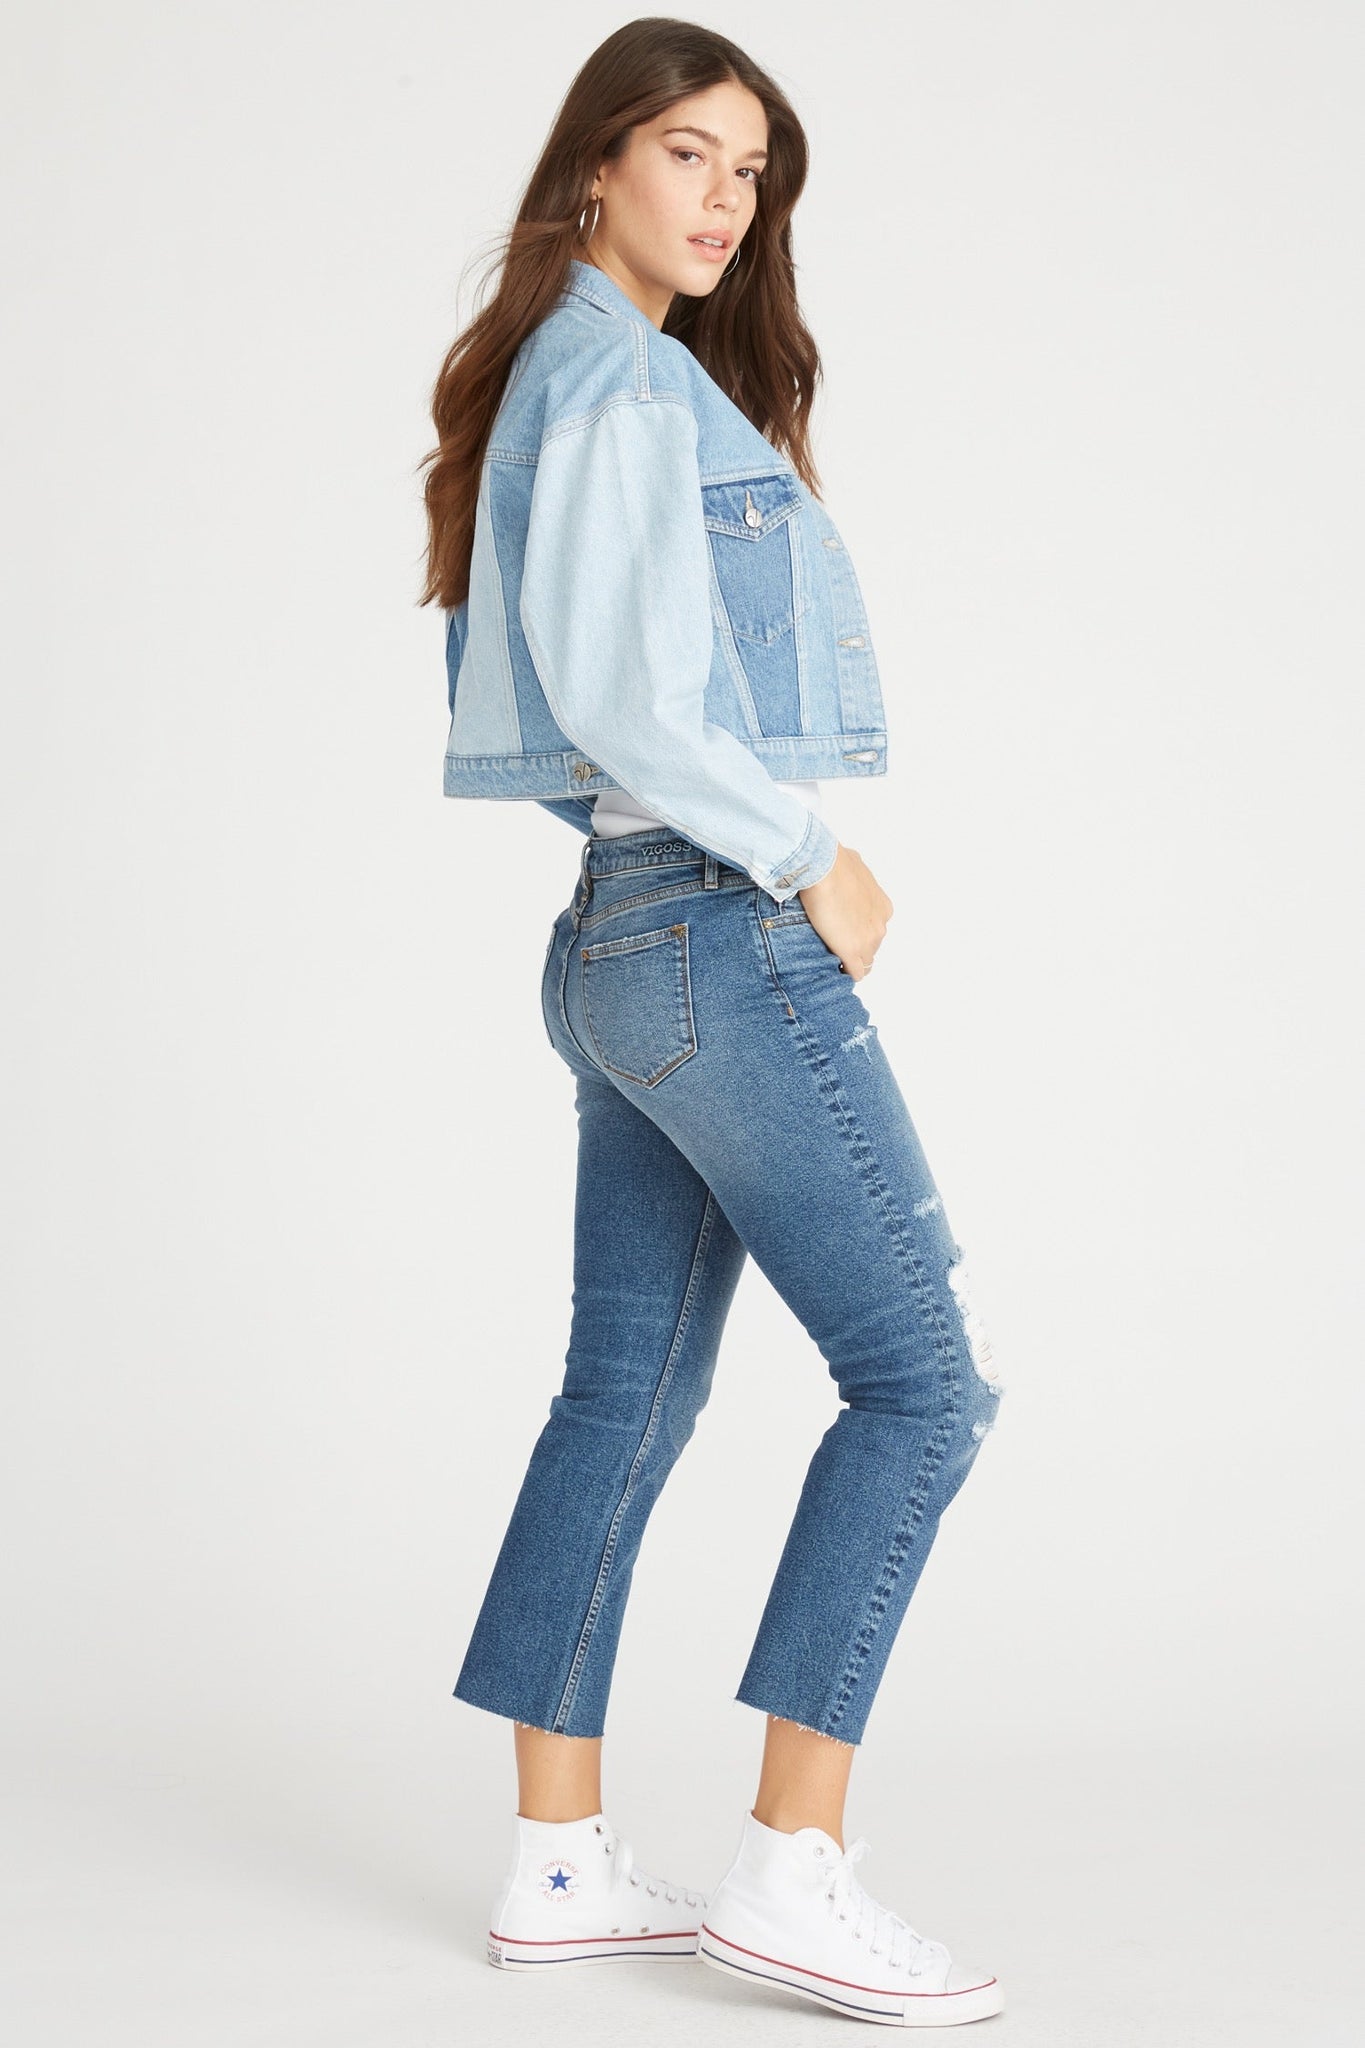 Load image into Gallery viewer, COLOR BLOCKED CROPPED DENIM JACKET
